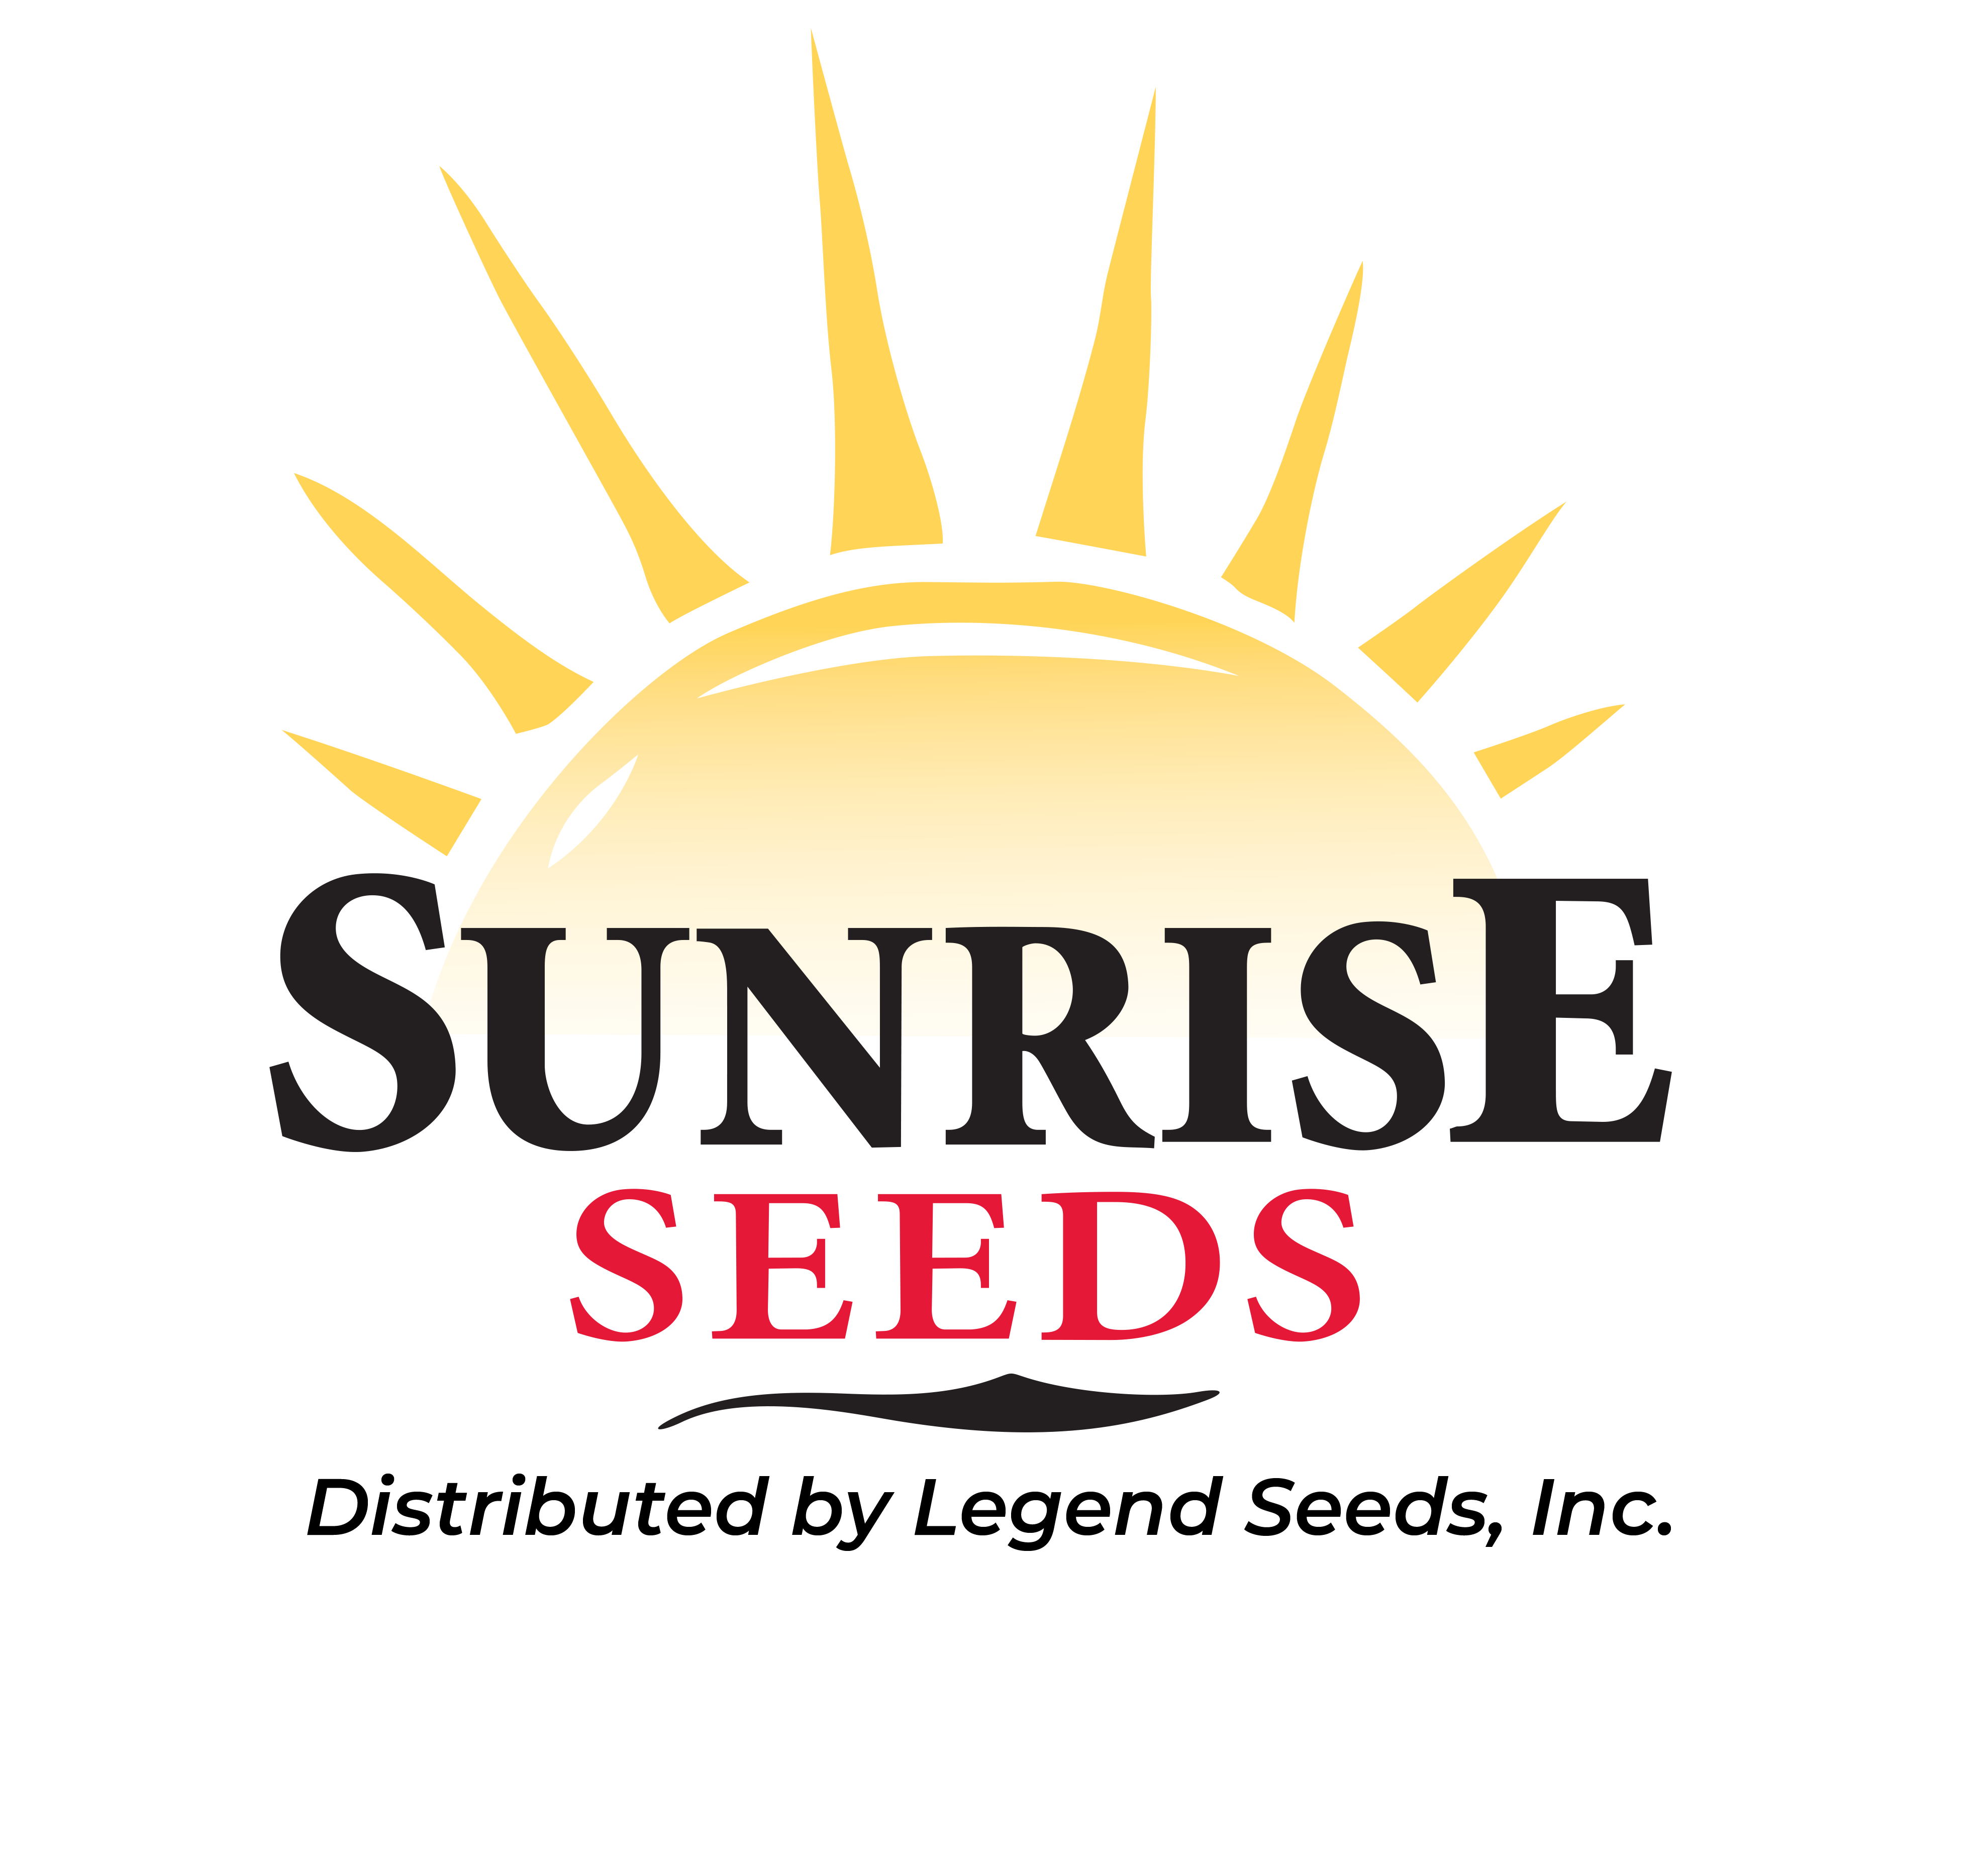 Sunrise Seeds logo distributed.png